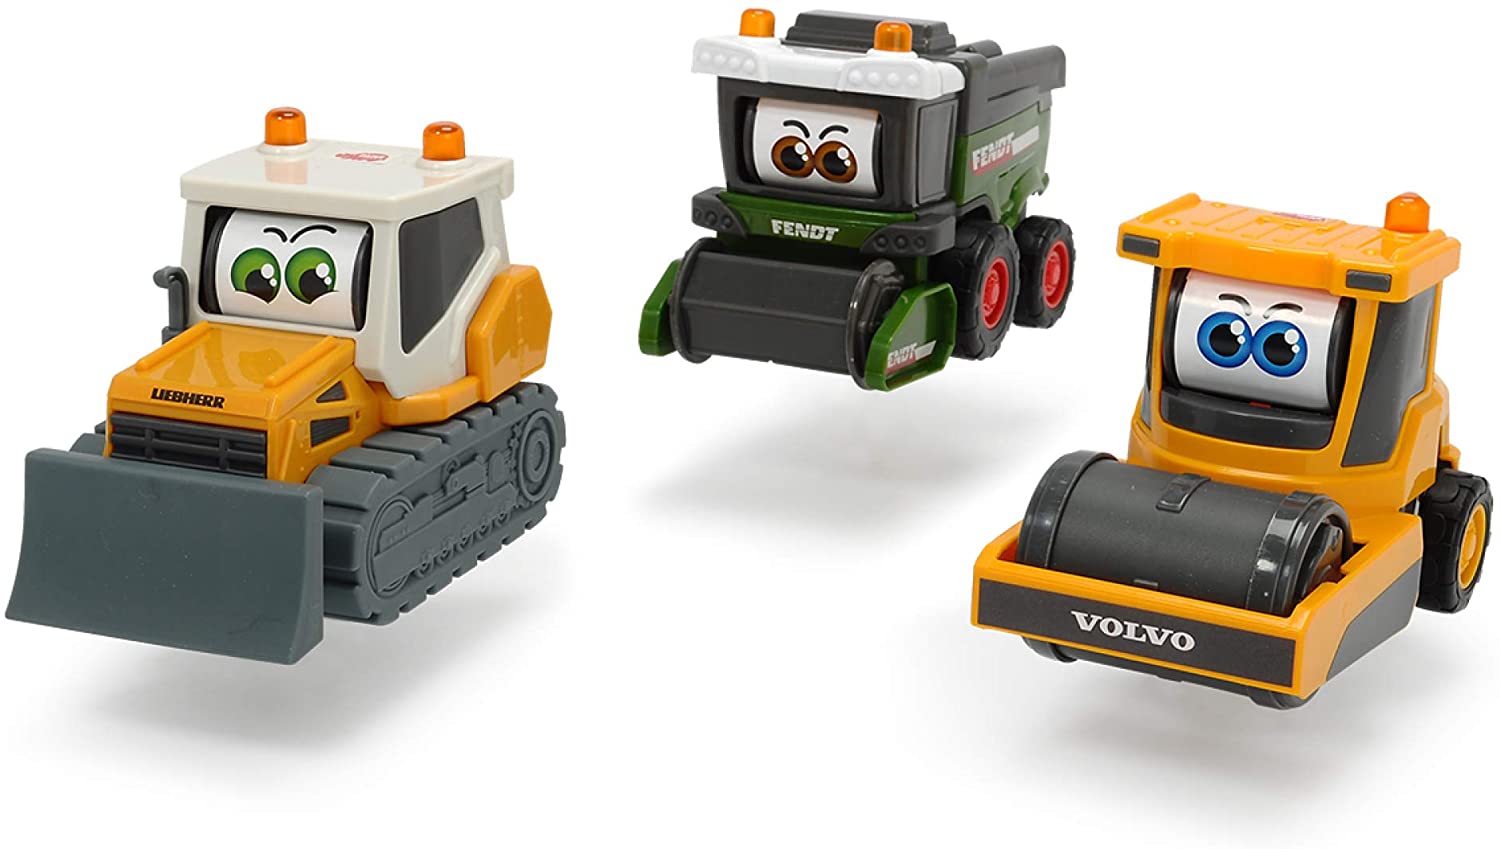 http://honestforwarder.com/uploads/product/IeSjDYXzAQ-dickie-toys-203812002-happy-rolling-eyes-vehicle-with-movable-eyes-for-toddlers-fendt-combine-harvester-volvo-roller-liebherr-bulldozer-3-different-models-16-cm0.jpg